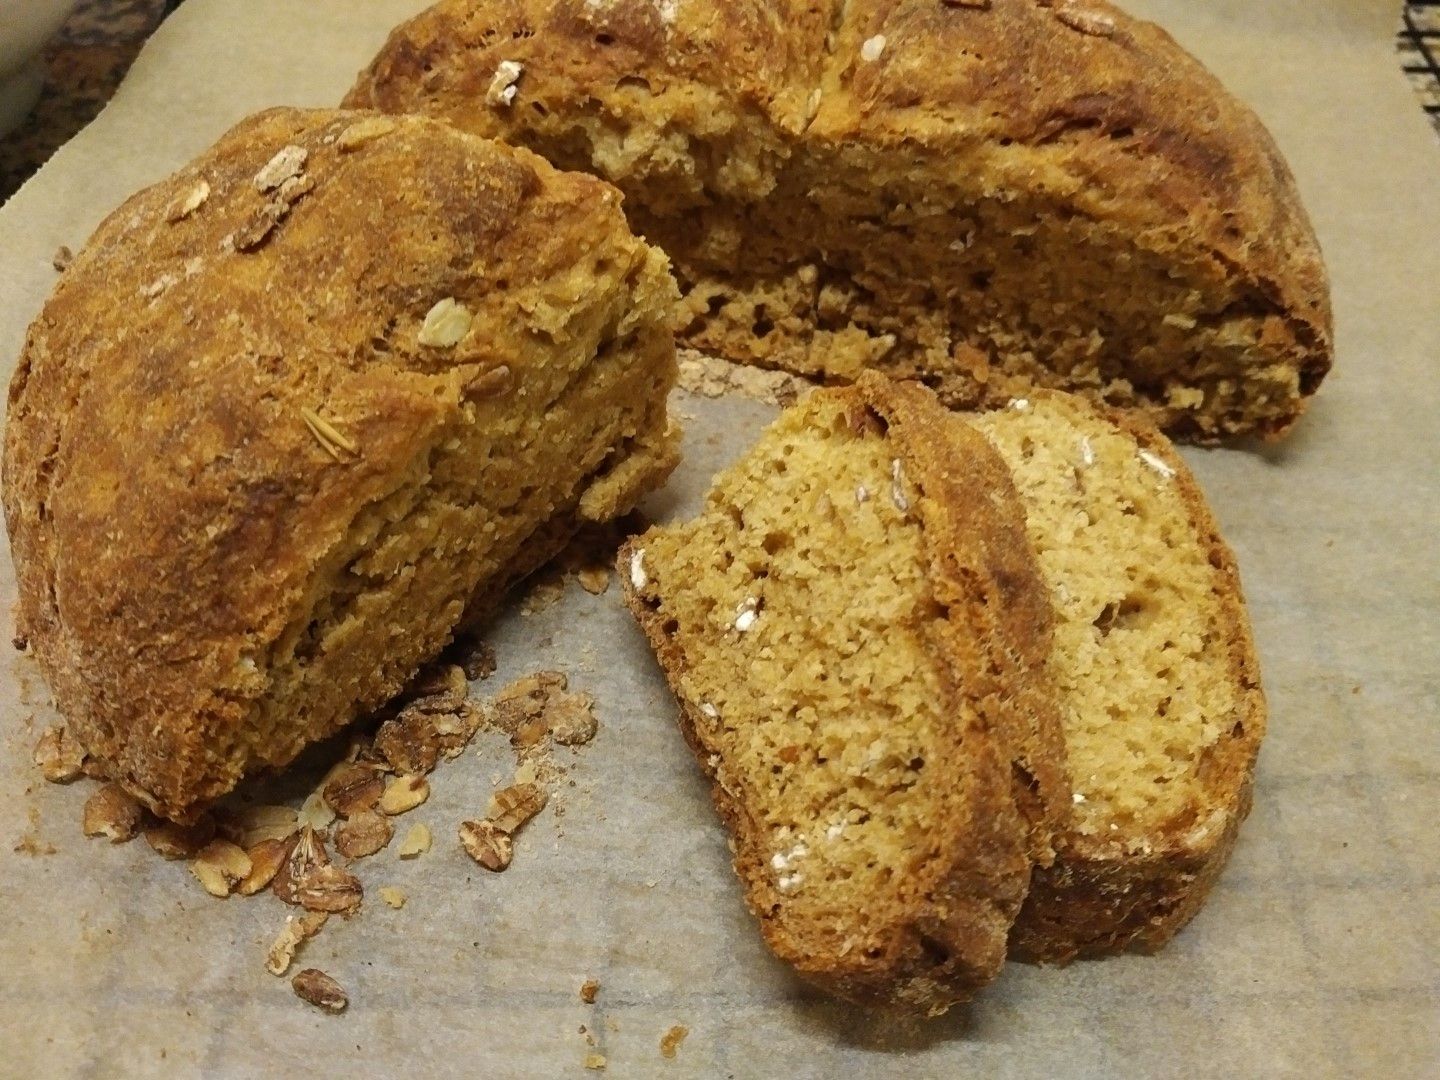 Home-made bread in minutes? No-knead and yeast free?